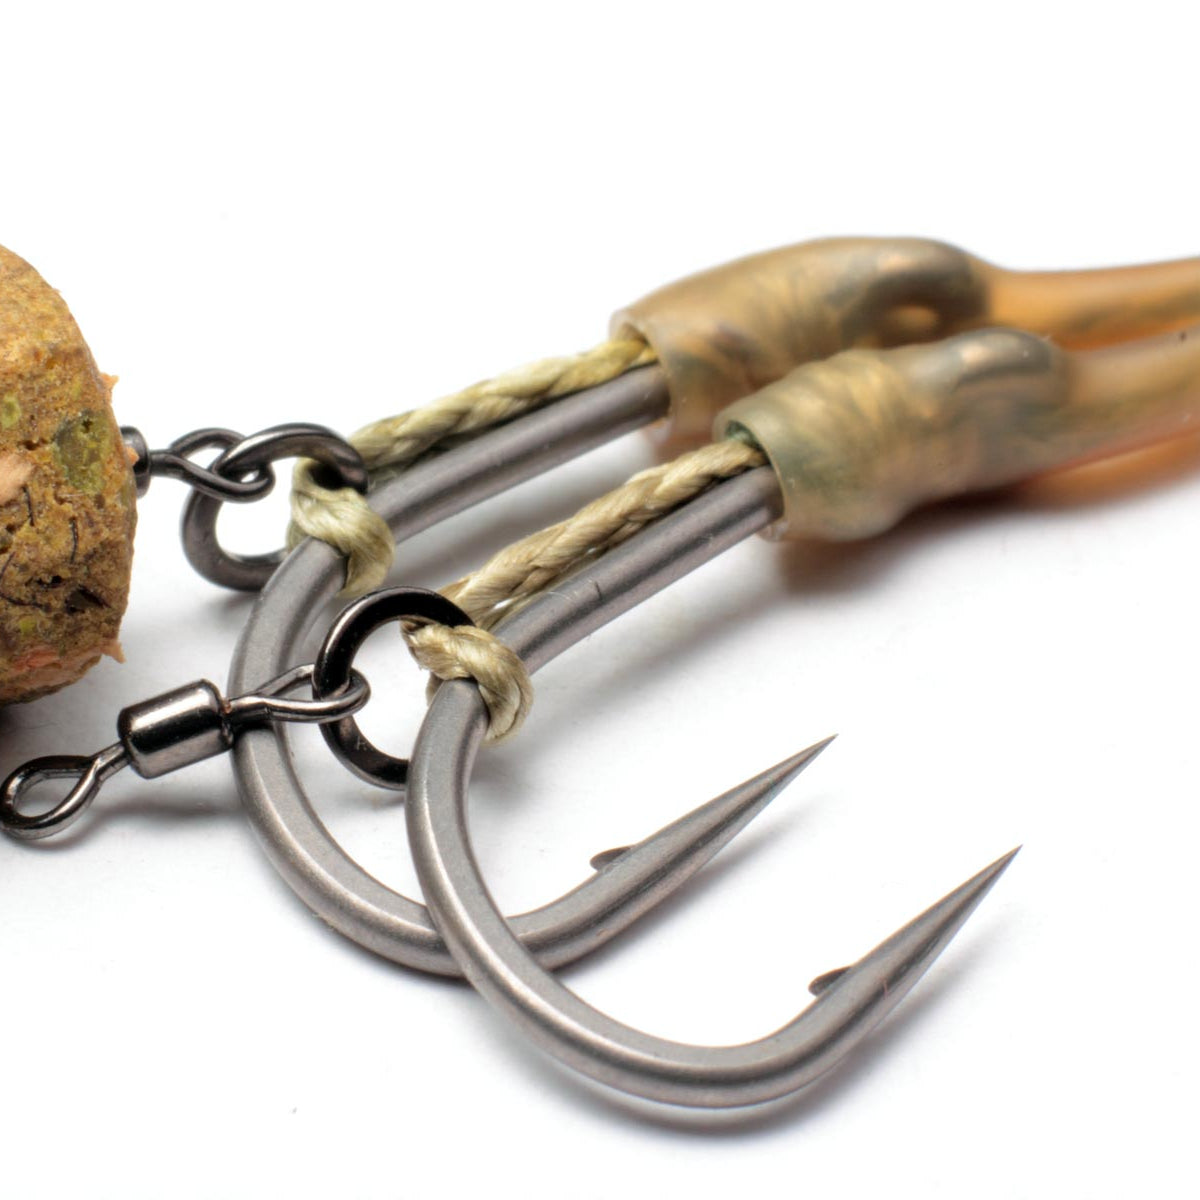 How to tie a balanced Tiger nut rig - Carp rigs by Angling Iron